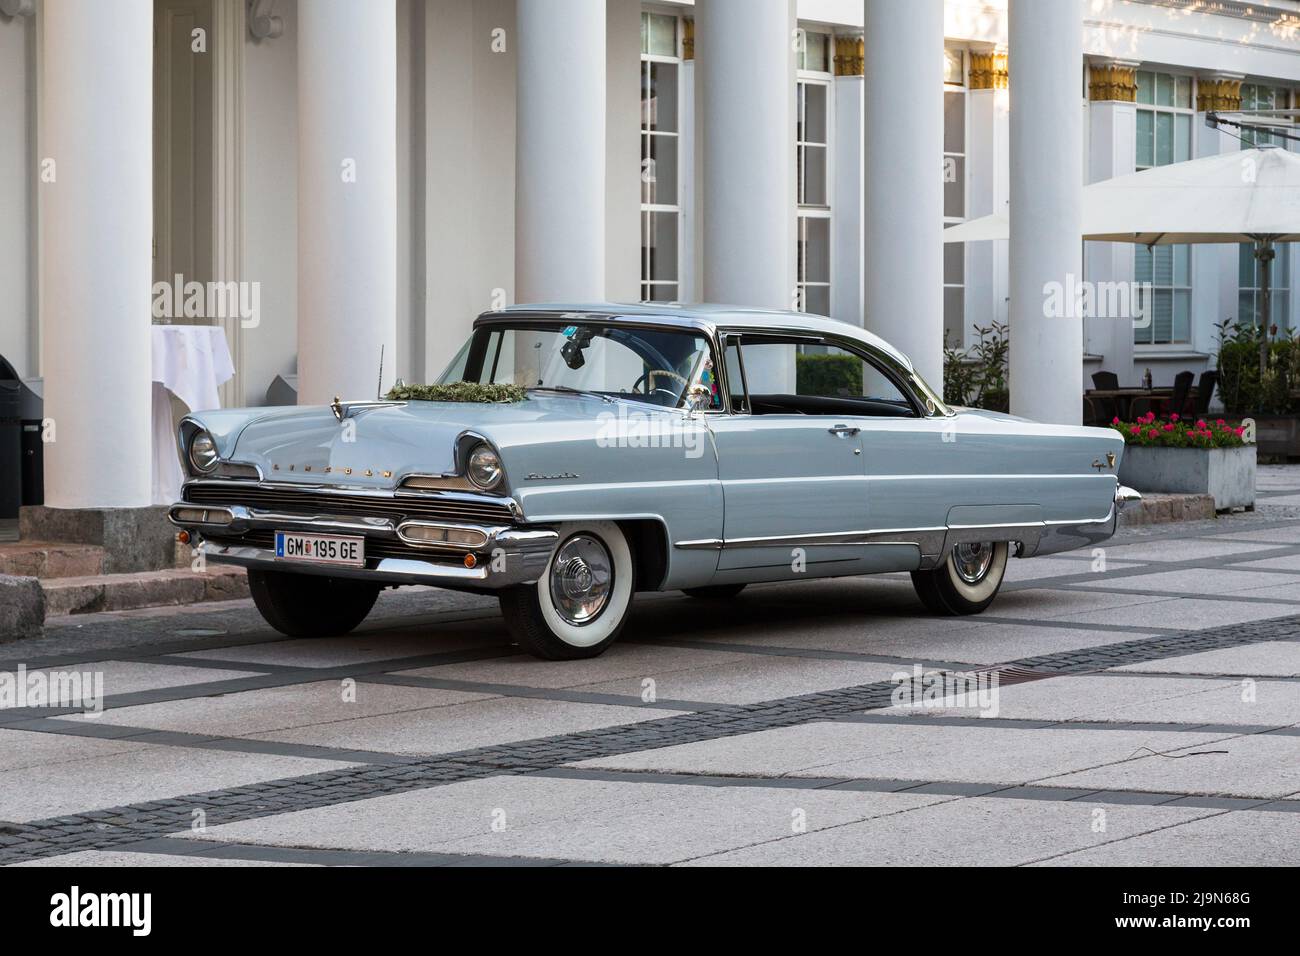 BAD ISCHL, AUSTRIA - MAY 18, 2019: This is an jld luxury car Lincoln Continental, which is  manufactured by famous US company. Stock Photo